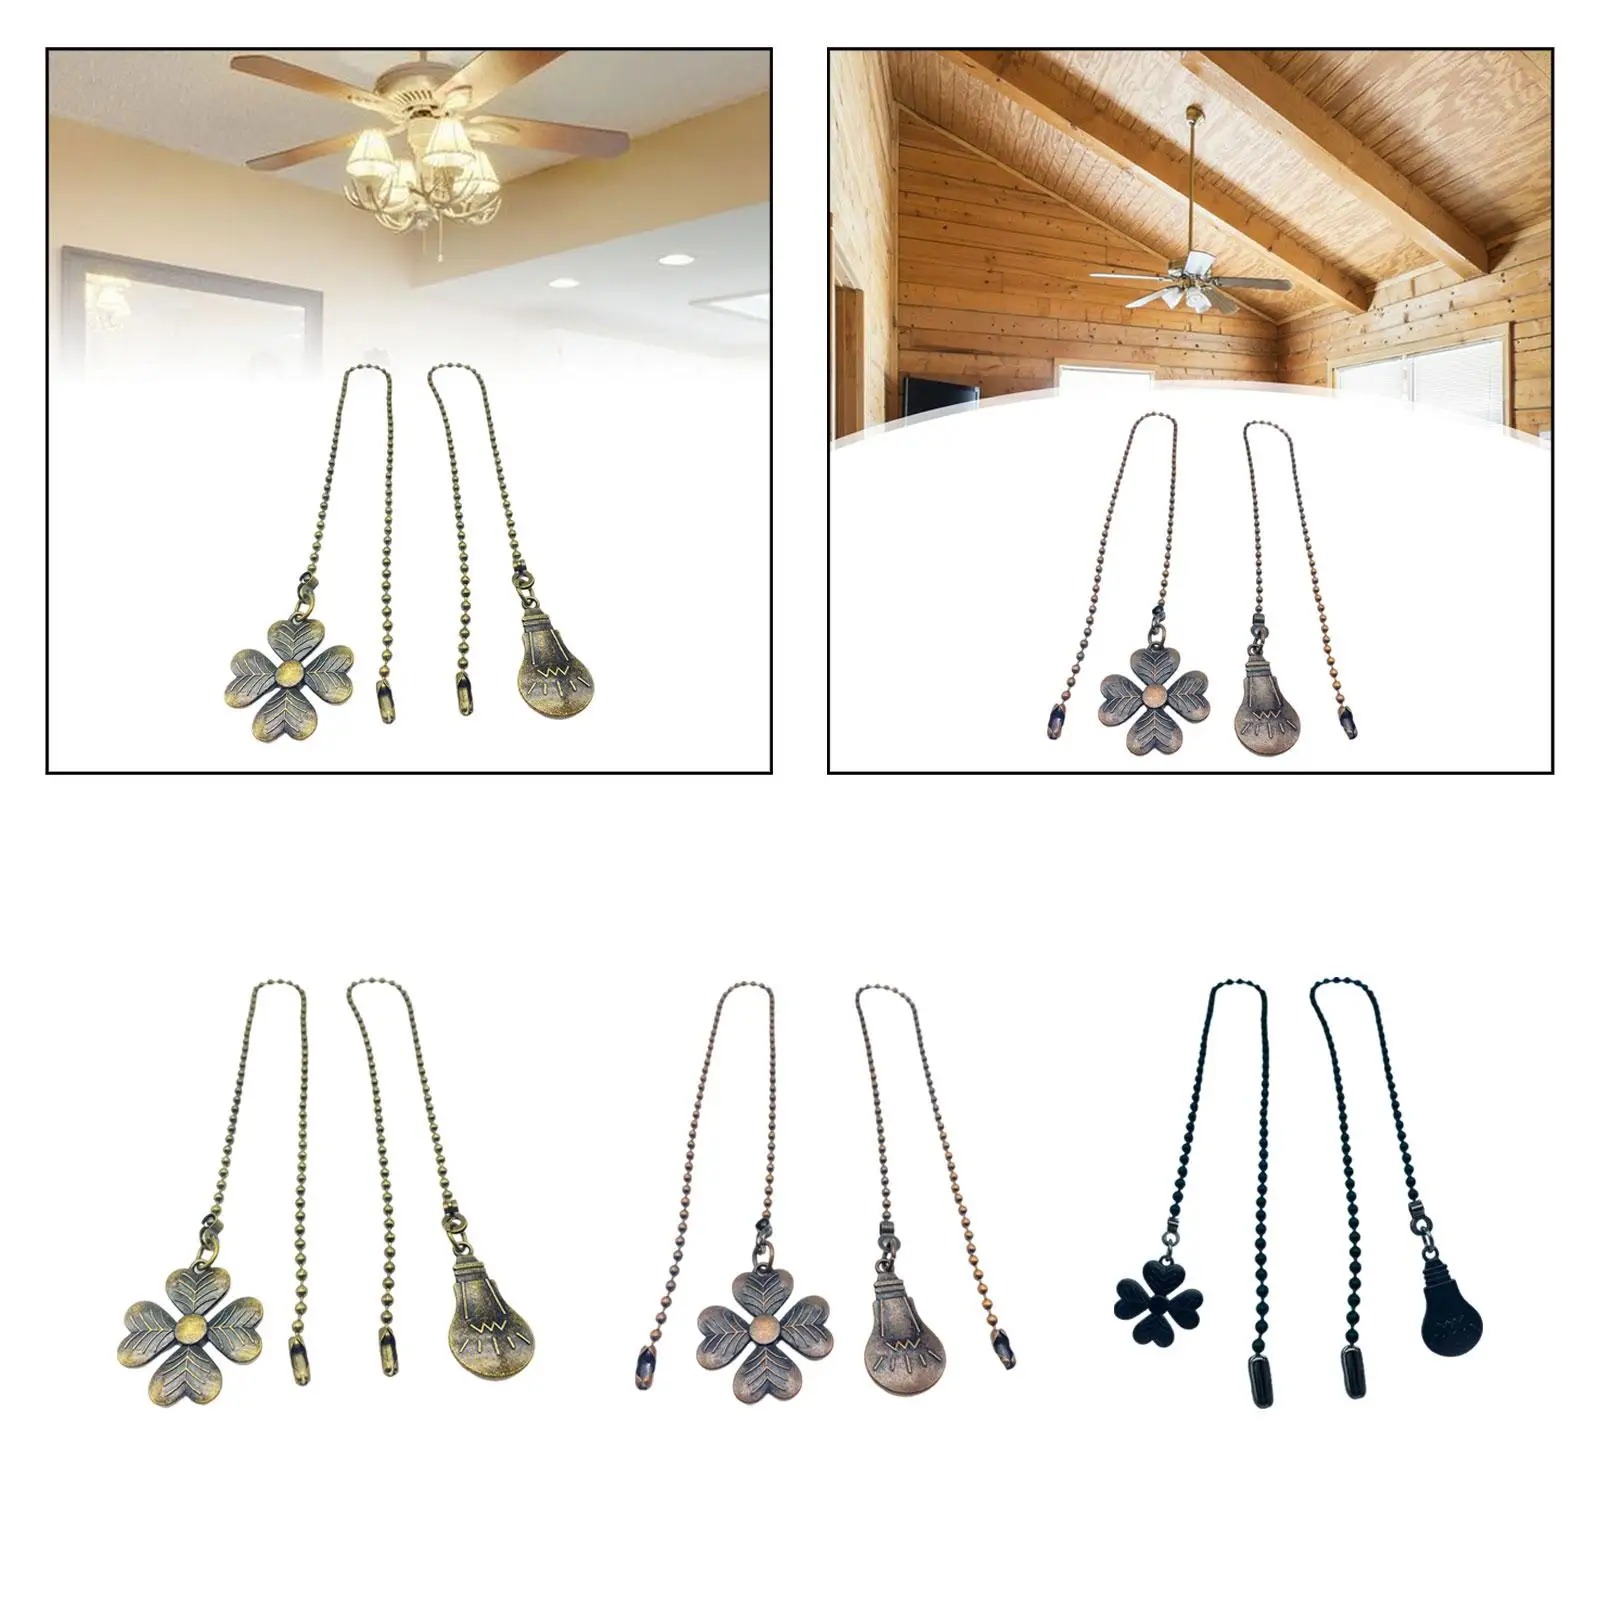 2x Ceiling Fan Extension Pull Chain with Connector 18 inch Ceiling Fan Pull Chain Set for lighting Lamp Bulb Switch Fixture